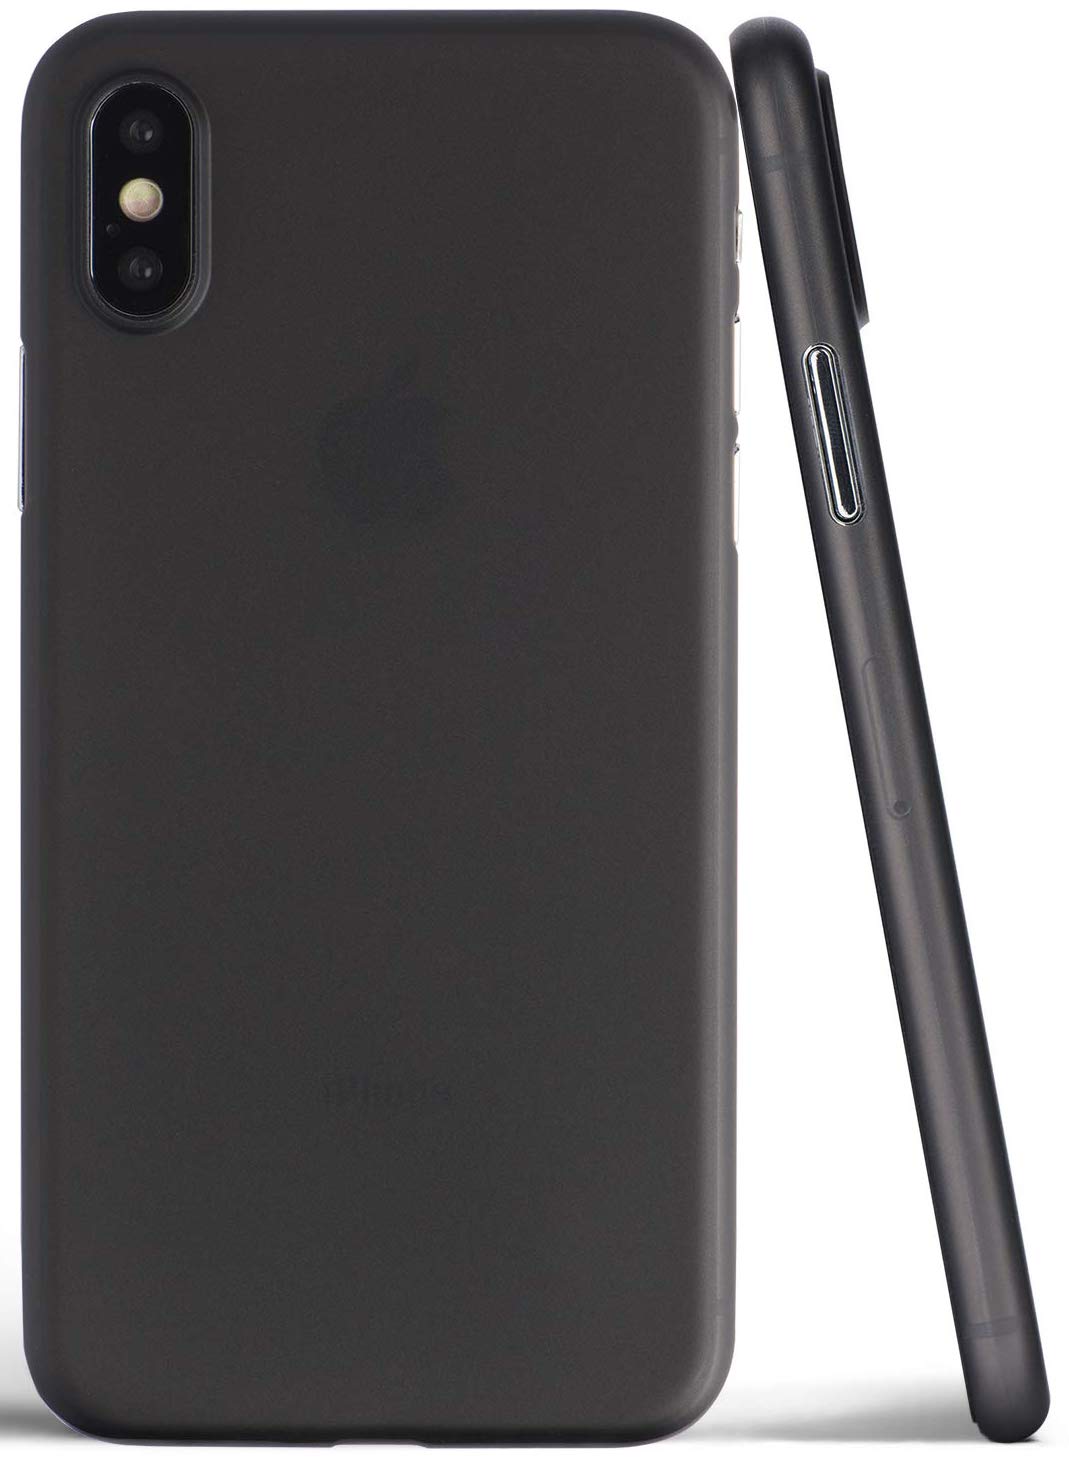 totallee thin iphone xs case black